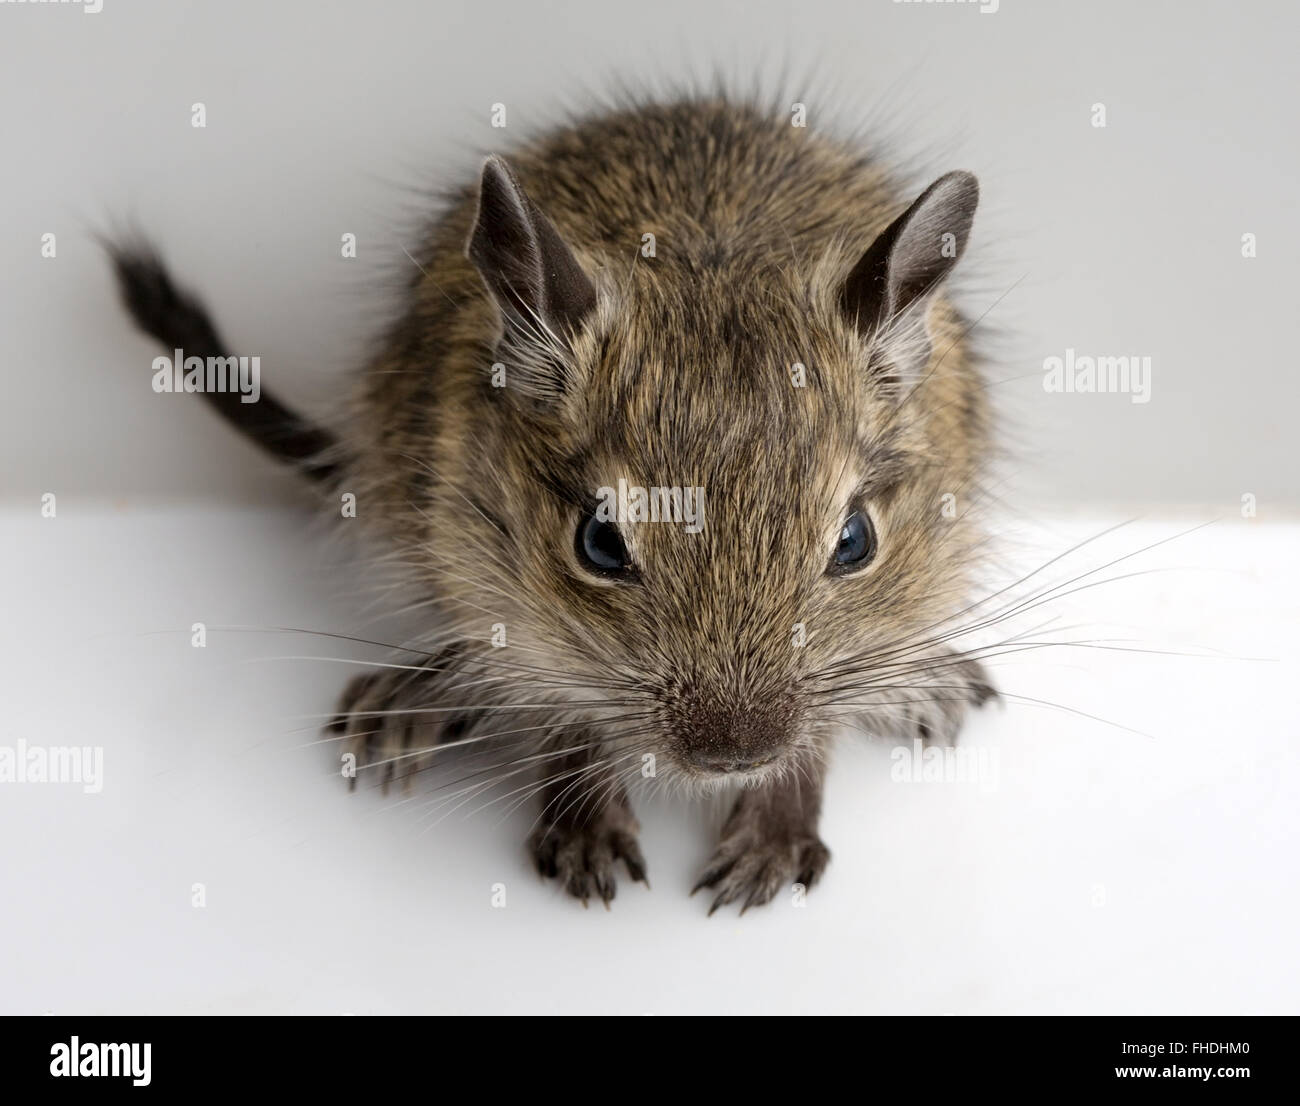 little baby hamster front full-sized closeup view on neutral background Stock Photo